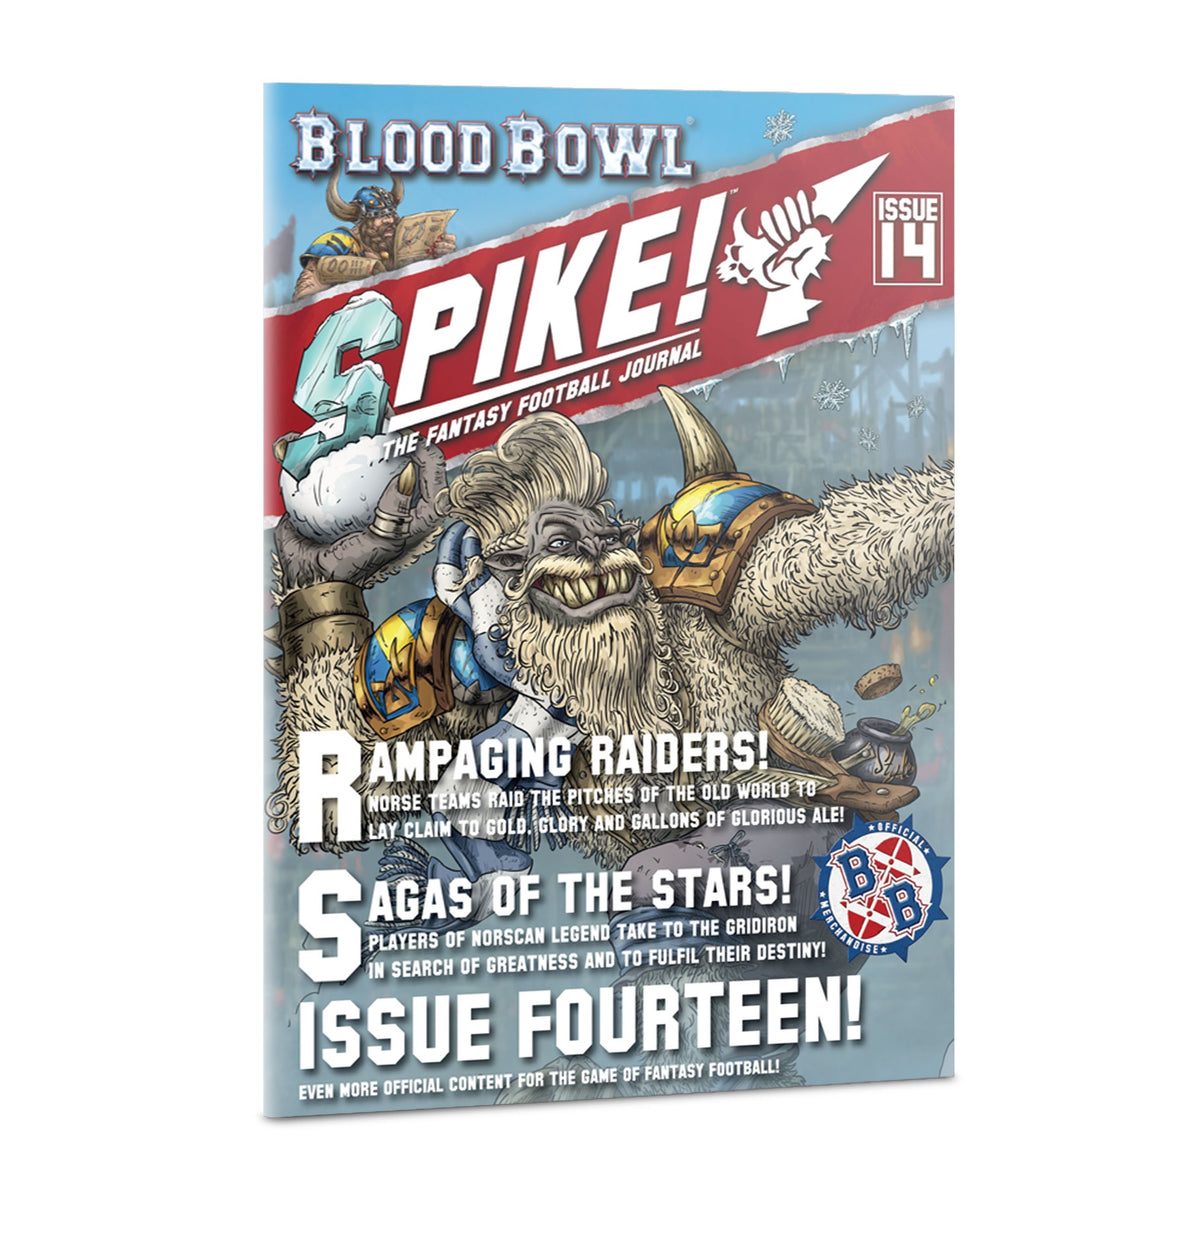 Blood Bowl – Spike Journal! Issue 14 (200-94)